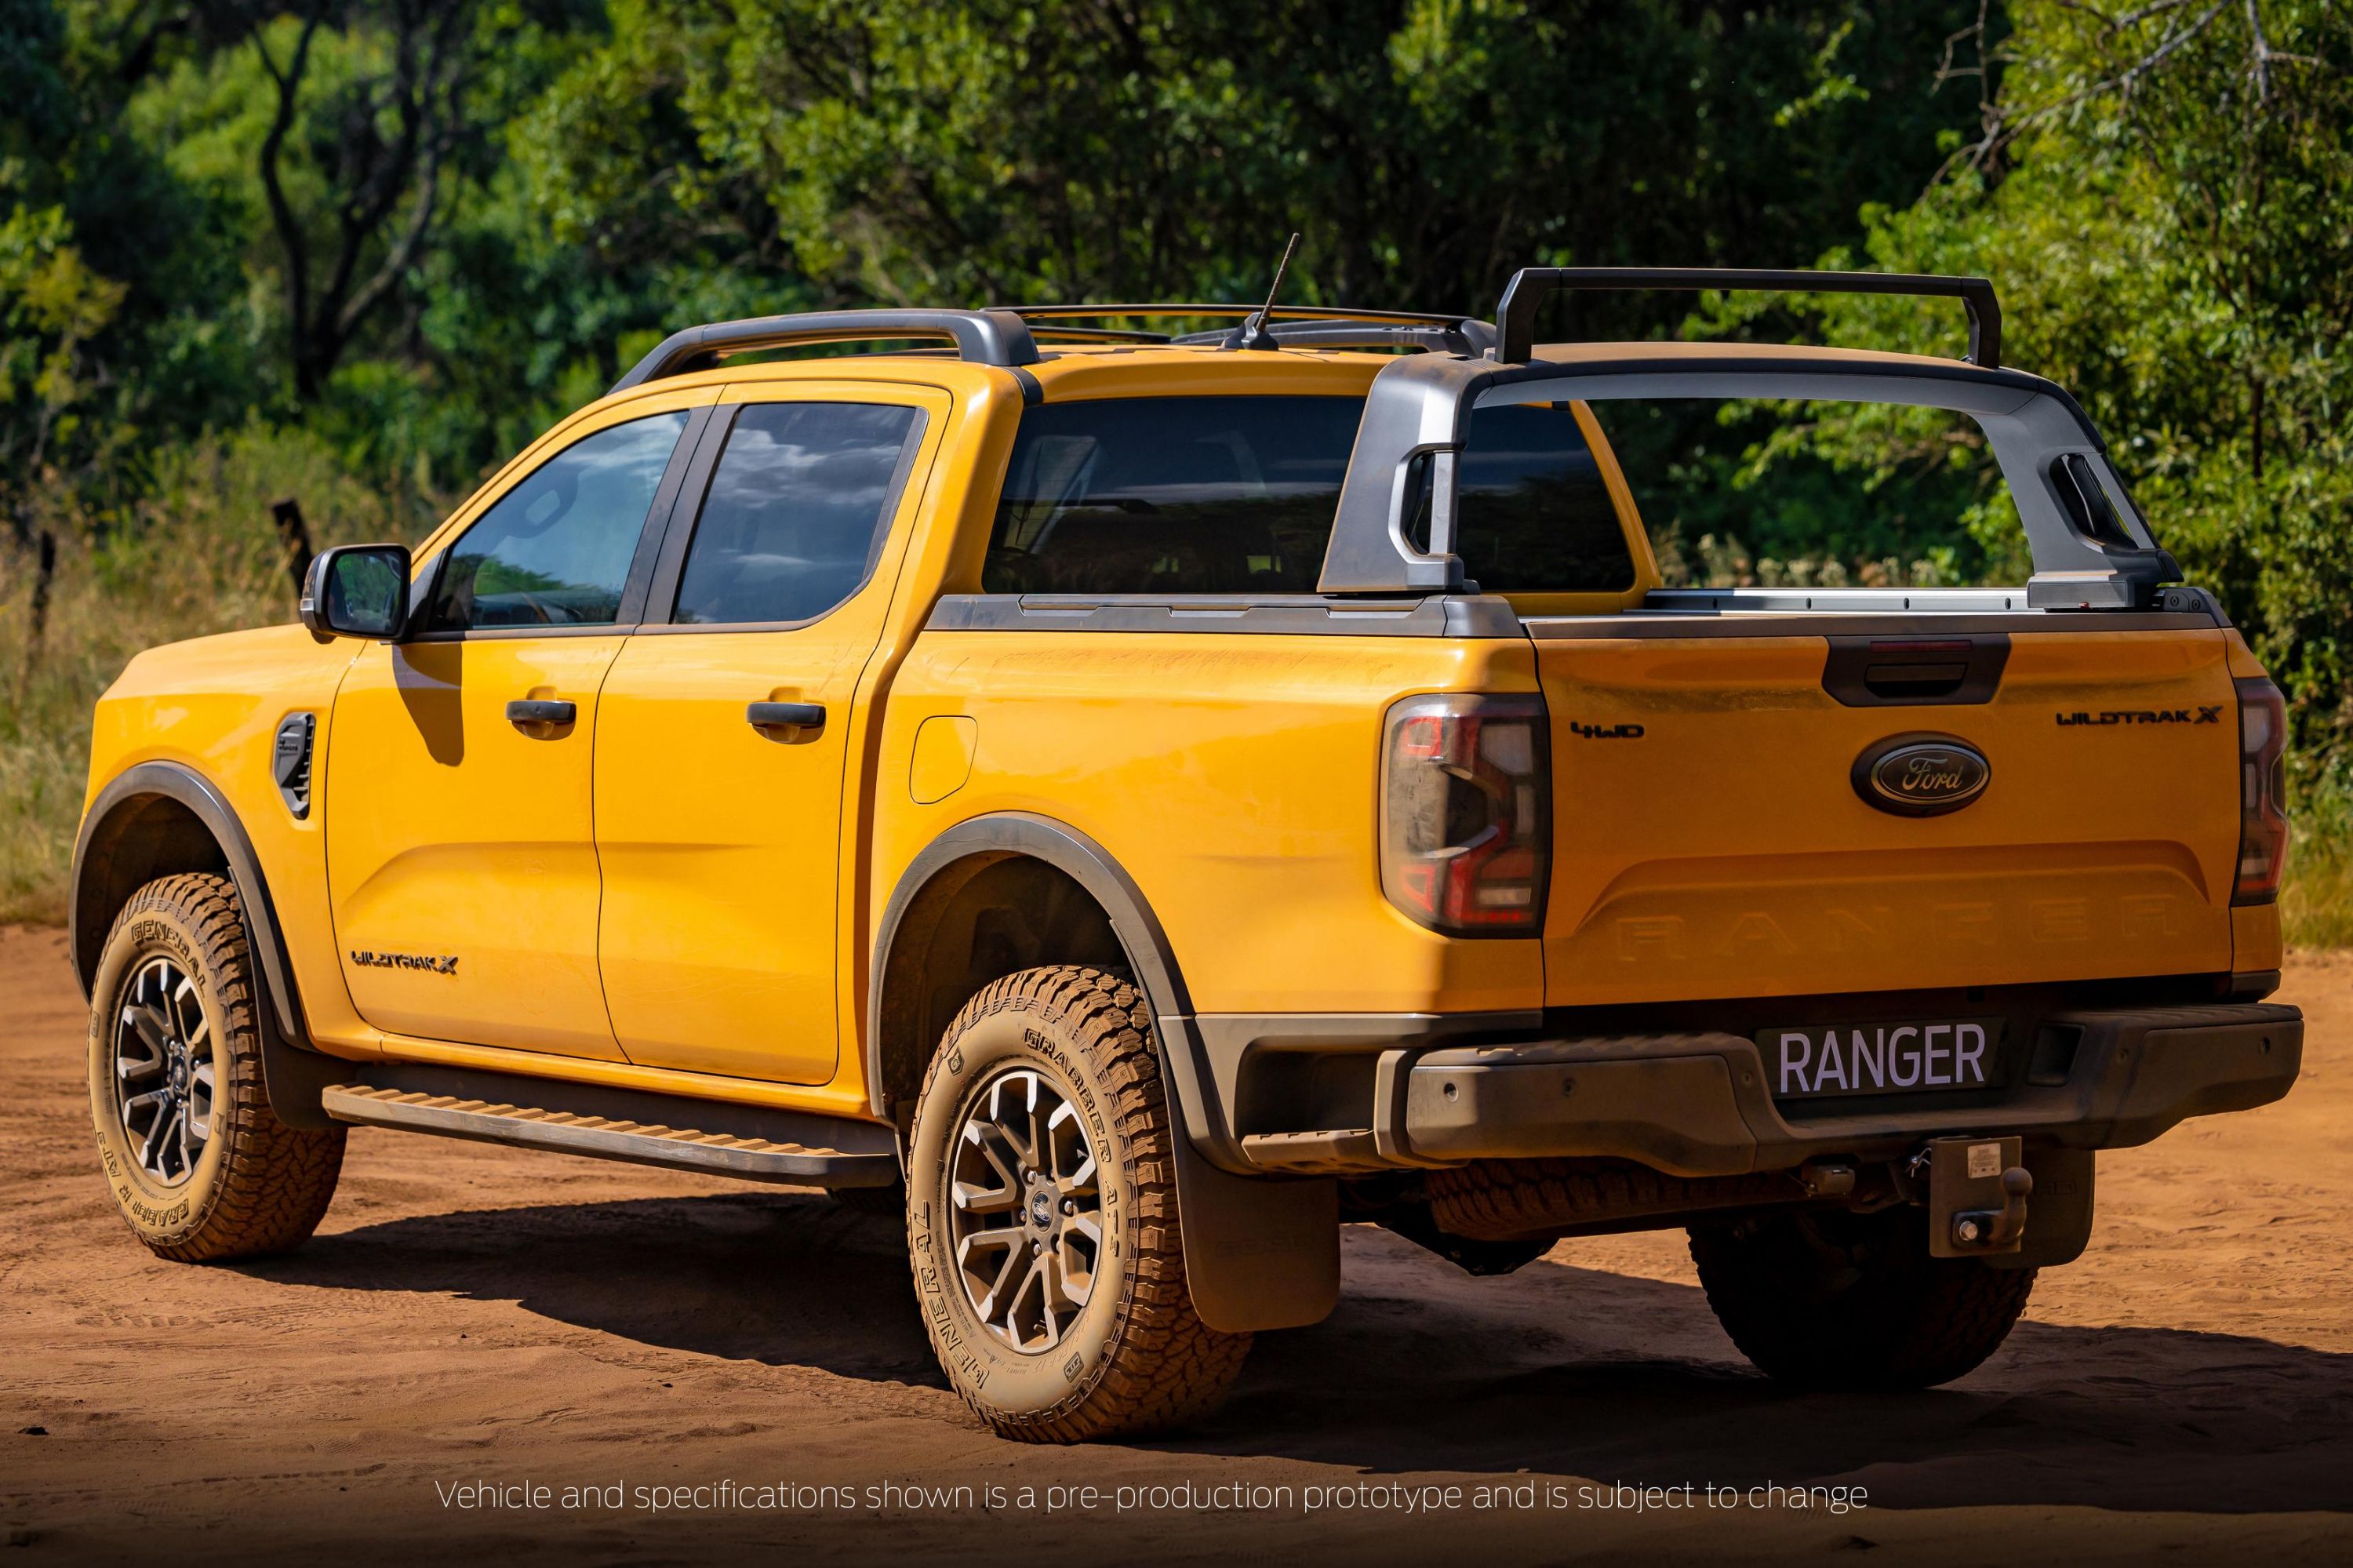 Ford drops new Ranger variant with wider track, lifted Bilstein shocks